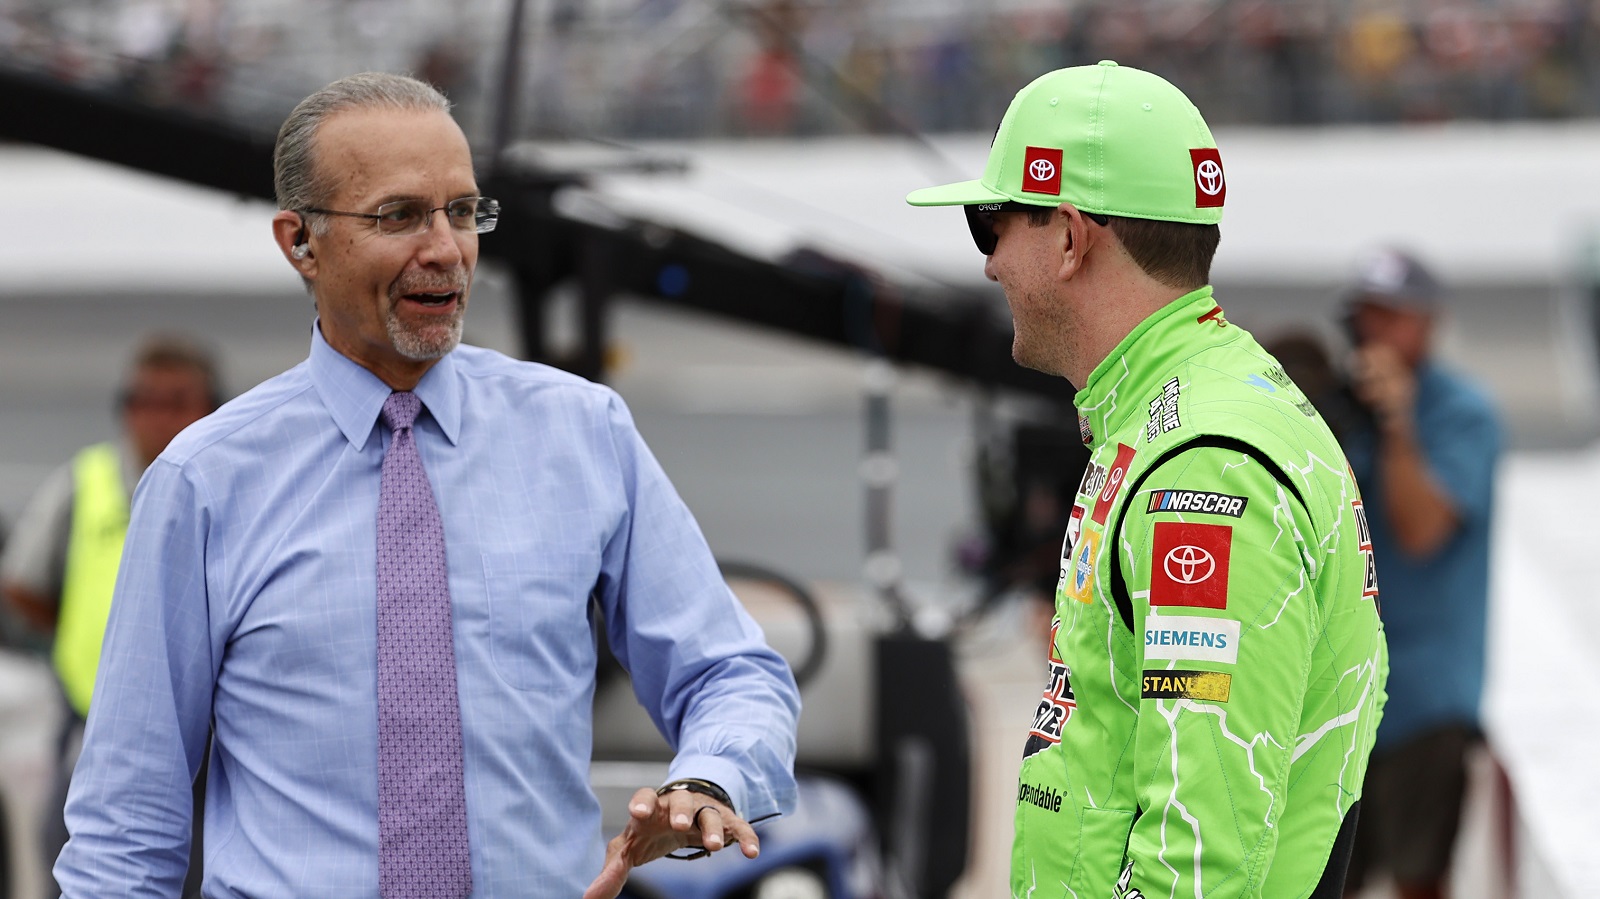 Kyle Petty talks to Joe Gibbs Racing driver Kyle Busch before the Foxwoods Resort Casino 301 on July 18, 2021, at New Hampshire Motor Speedway.